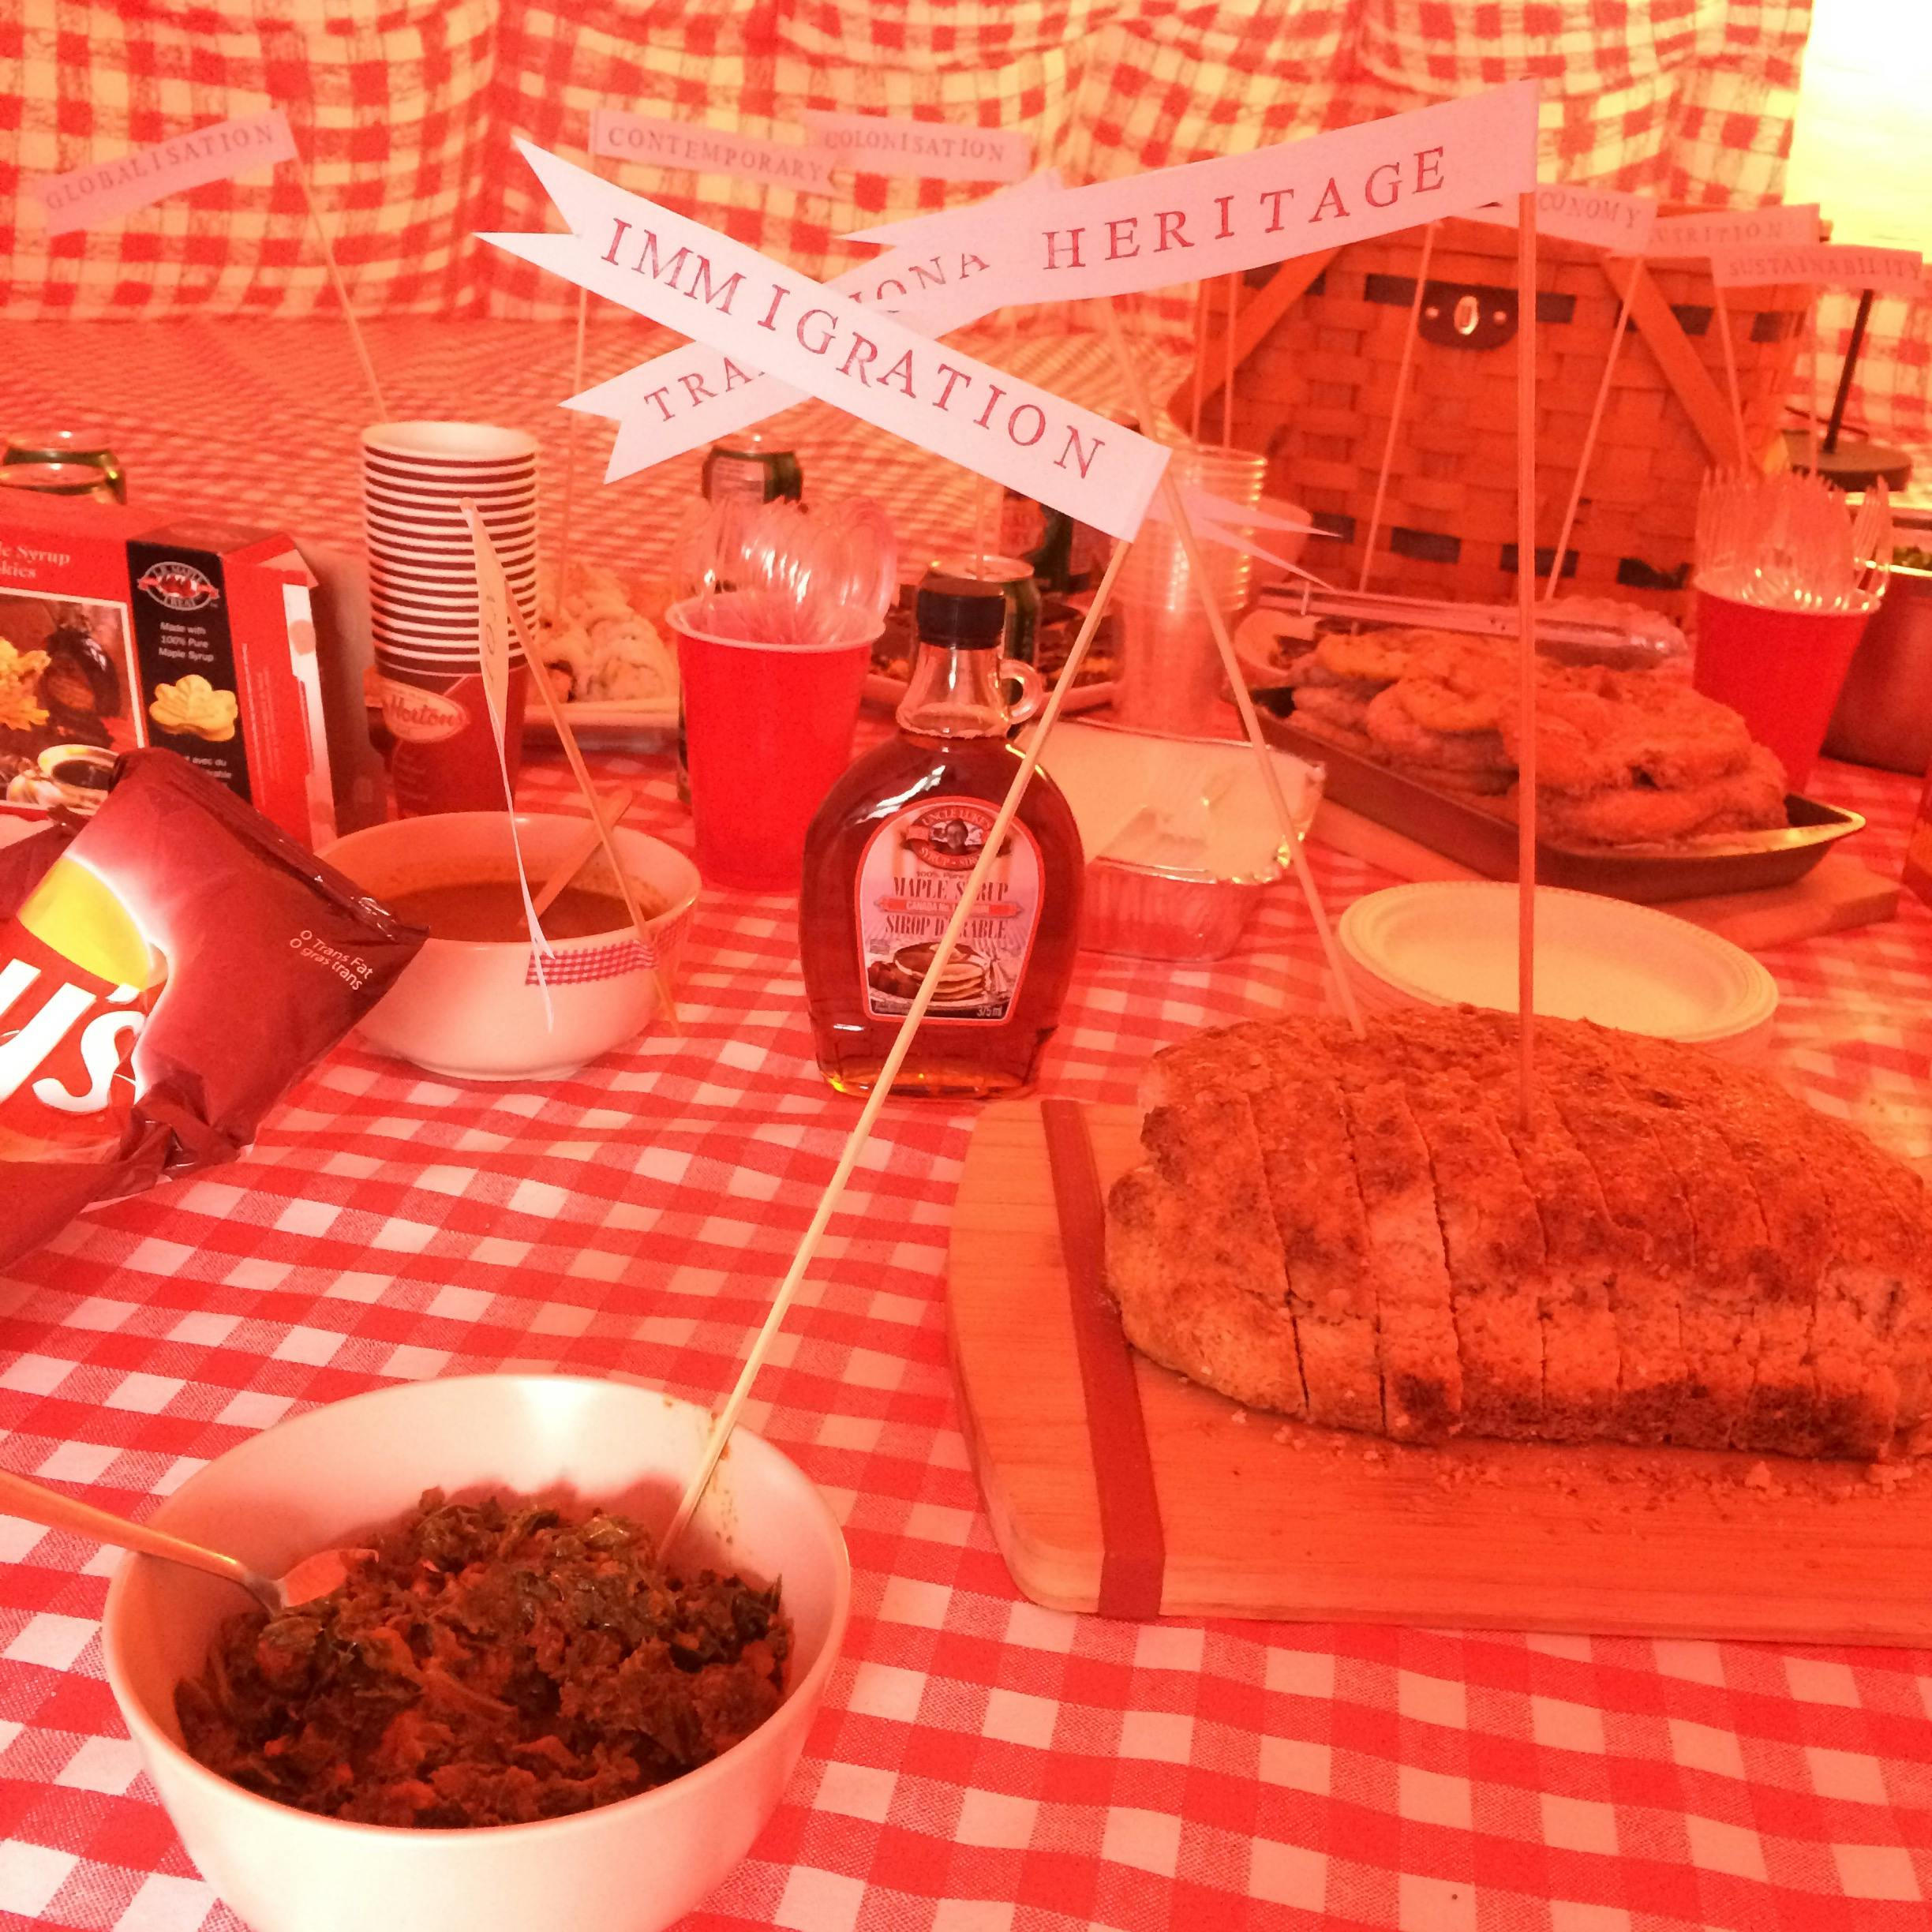 An image of many dishes placed inside red and white gingham patterned tent. Small flags showing various words, such as immigration and heritage, are sticking out of each dish.